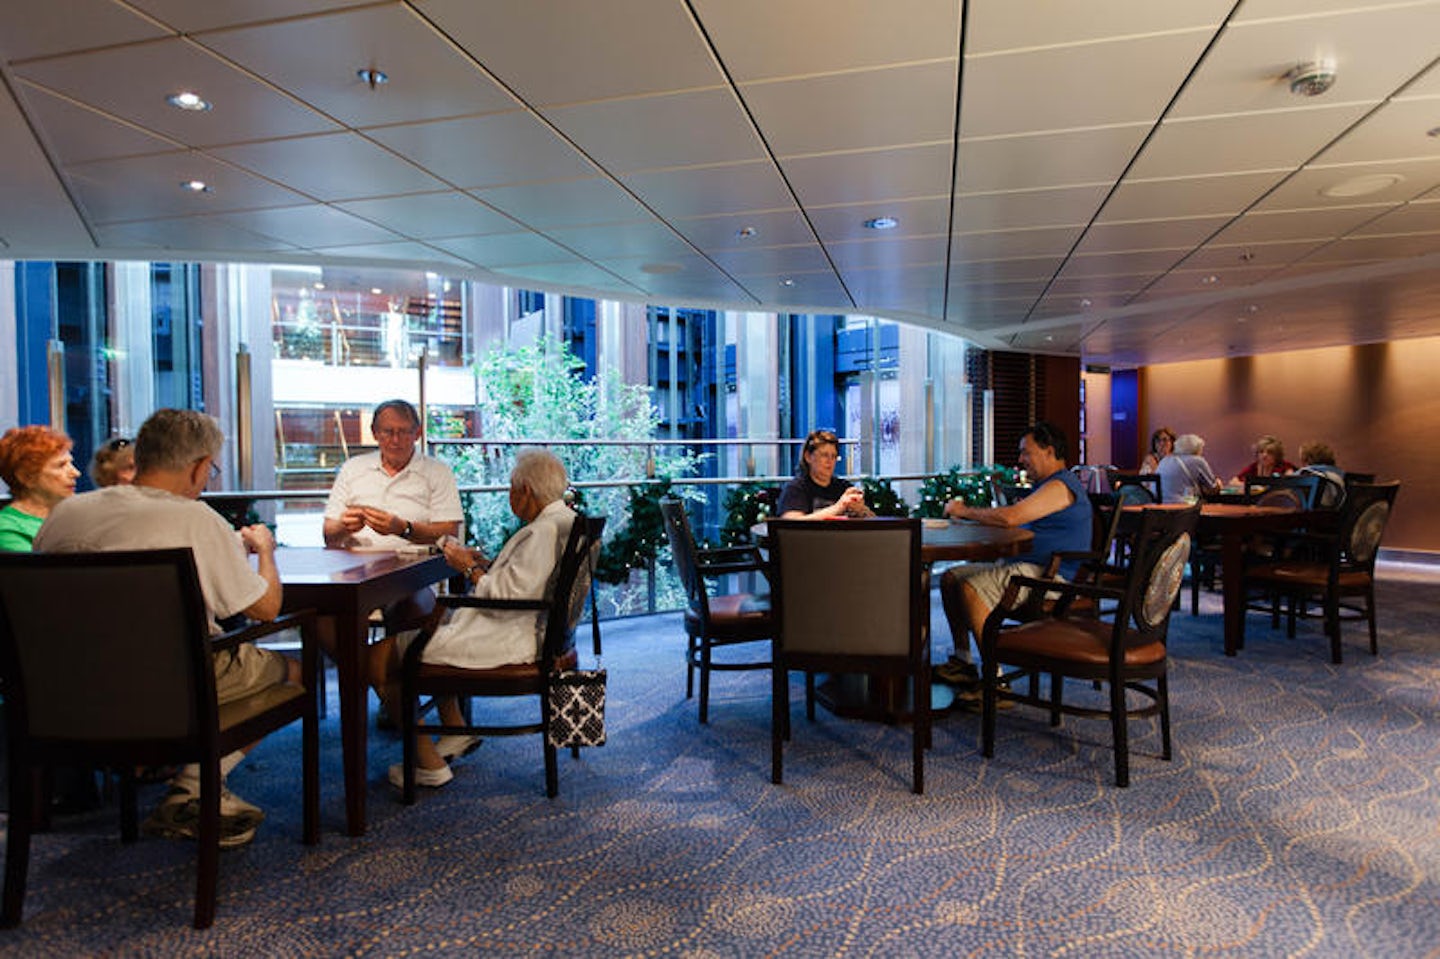 The Card Room on Celebrity Silhouette